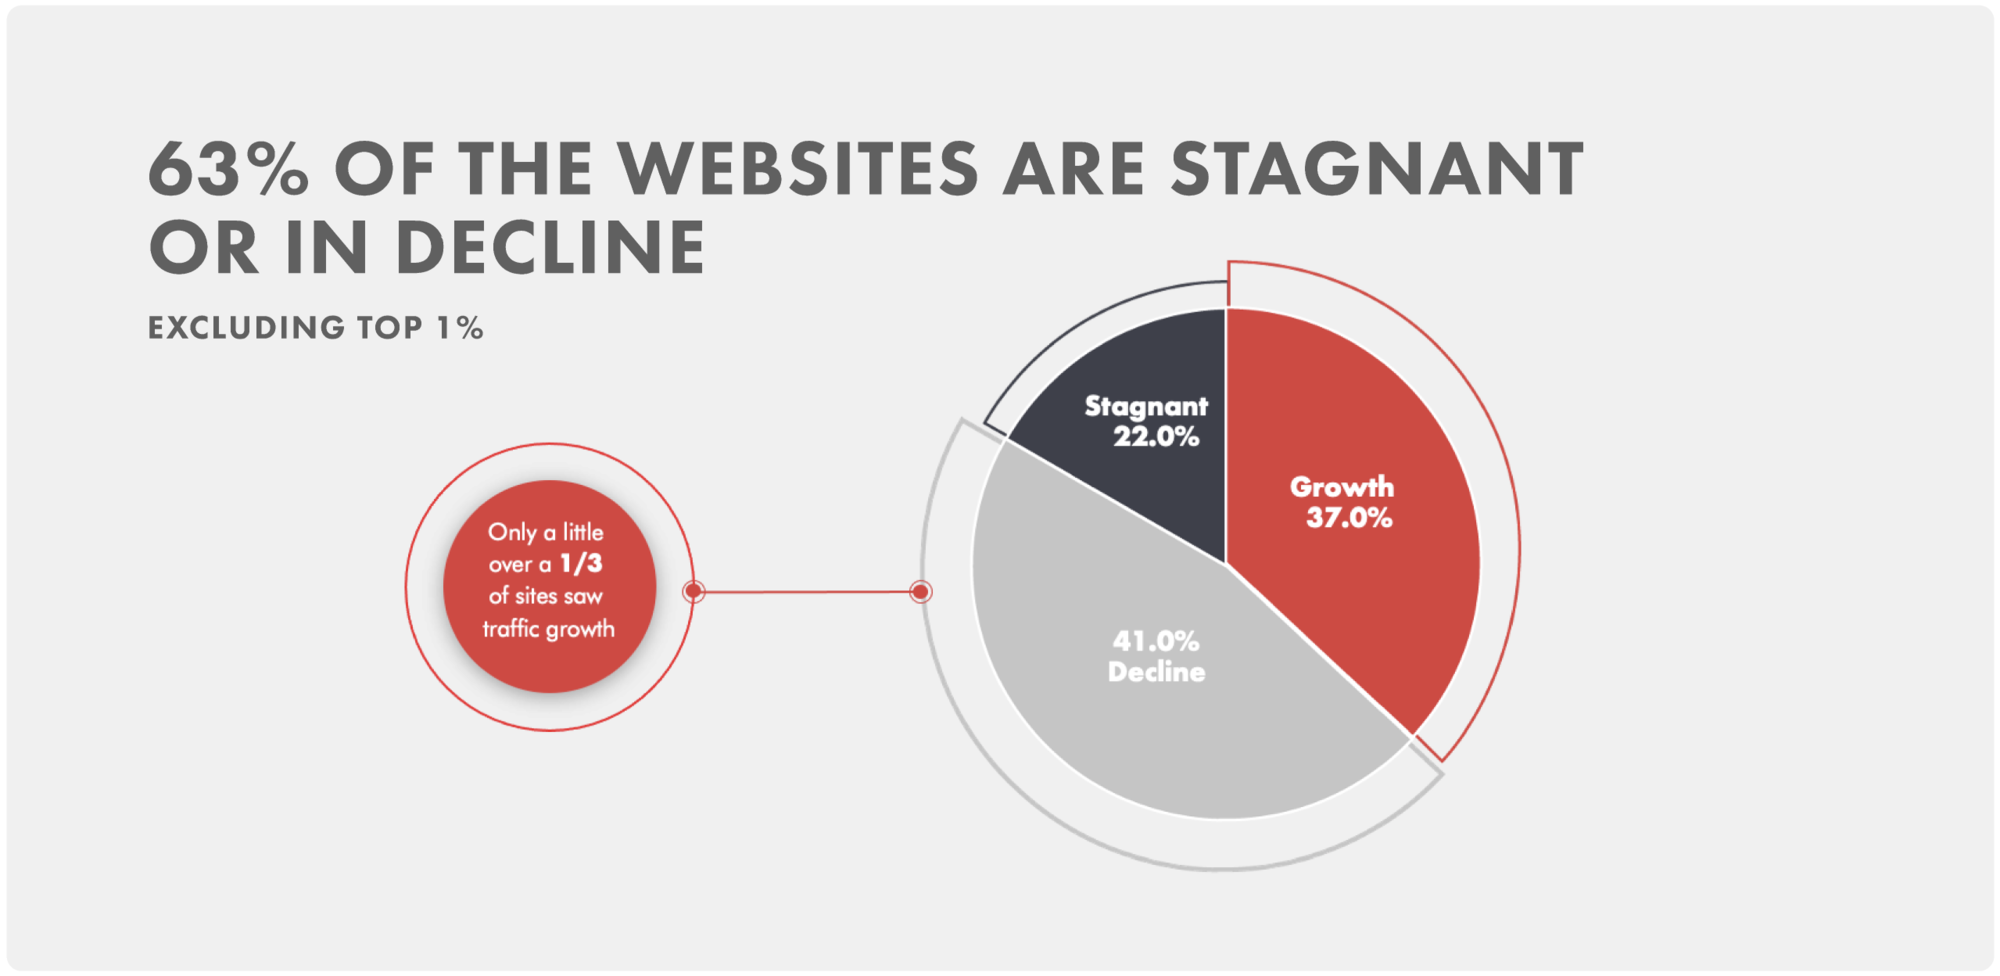 63% of the websites are stagnant or in decline